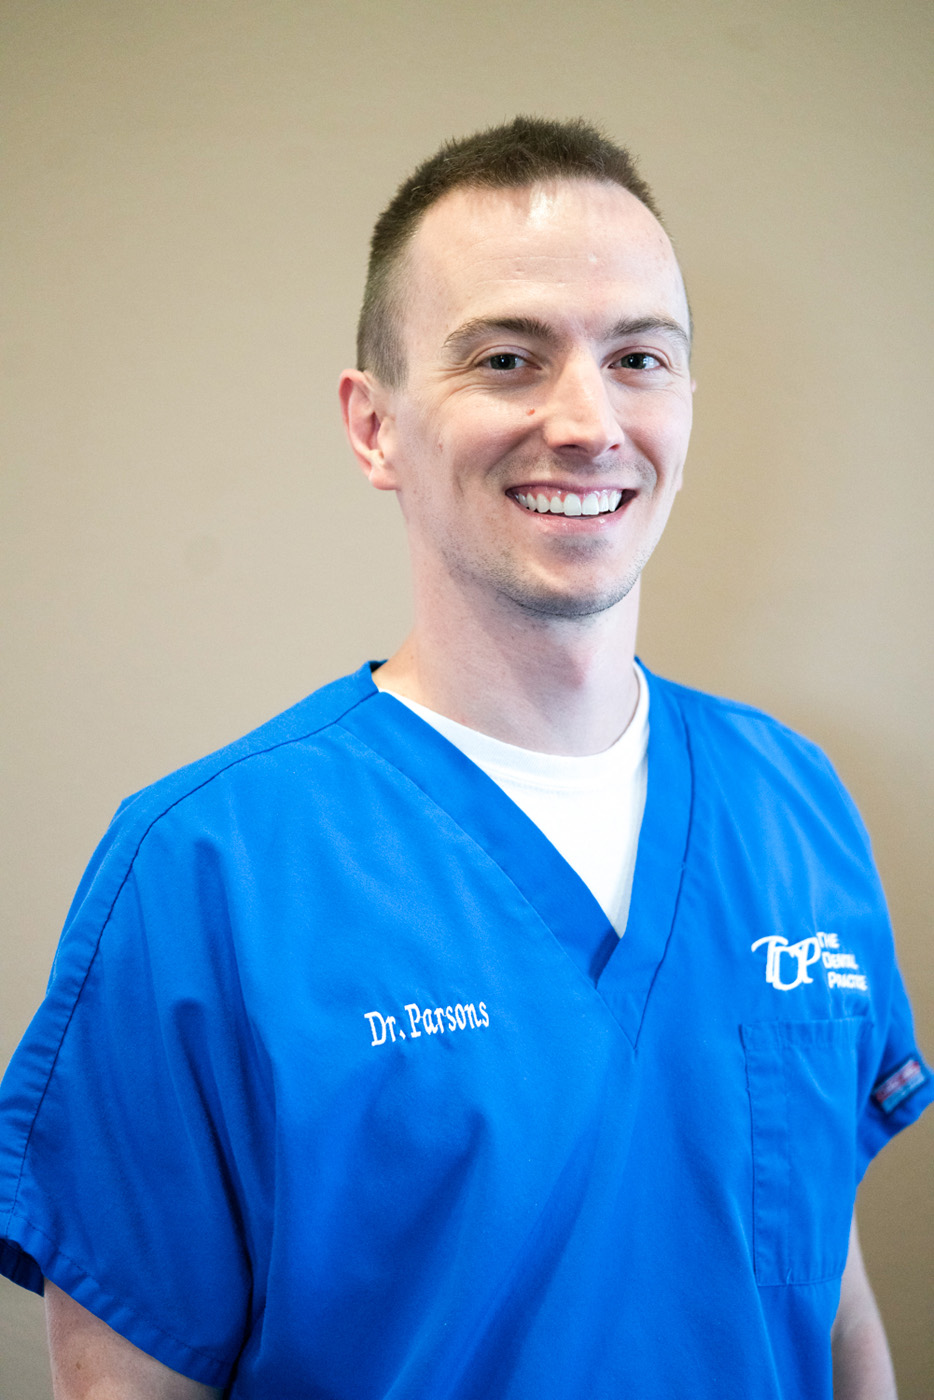 Dr. Jacob Parsons, DDS - Dentist in Newton, IA at The Dental Practice